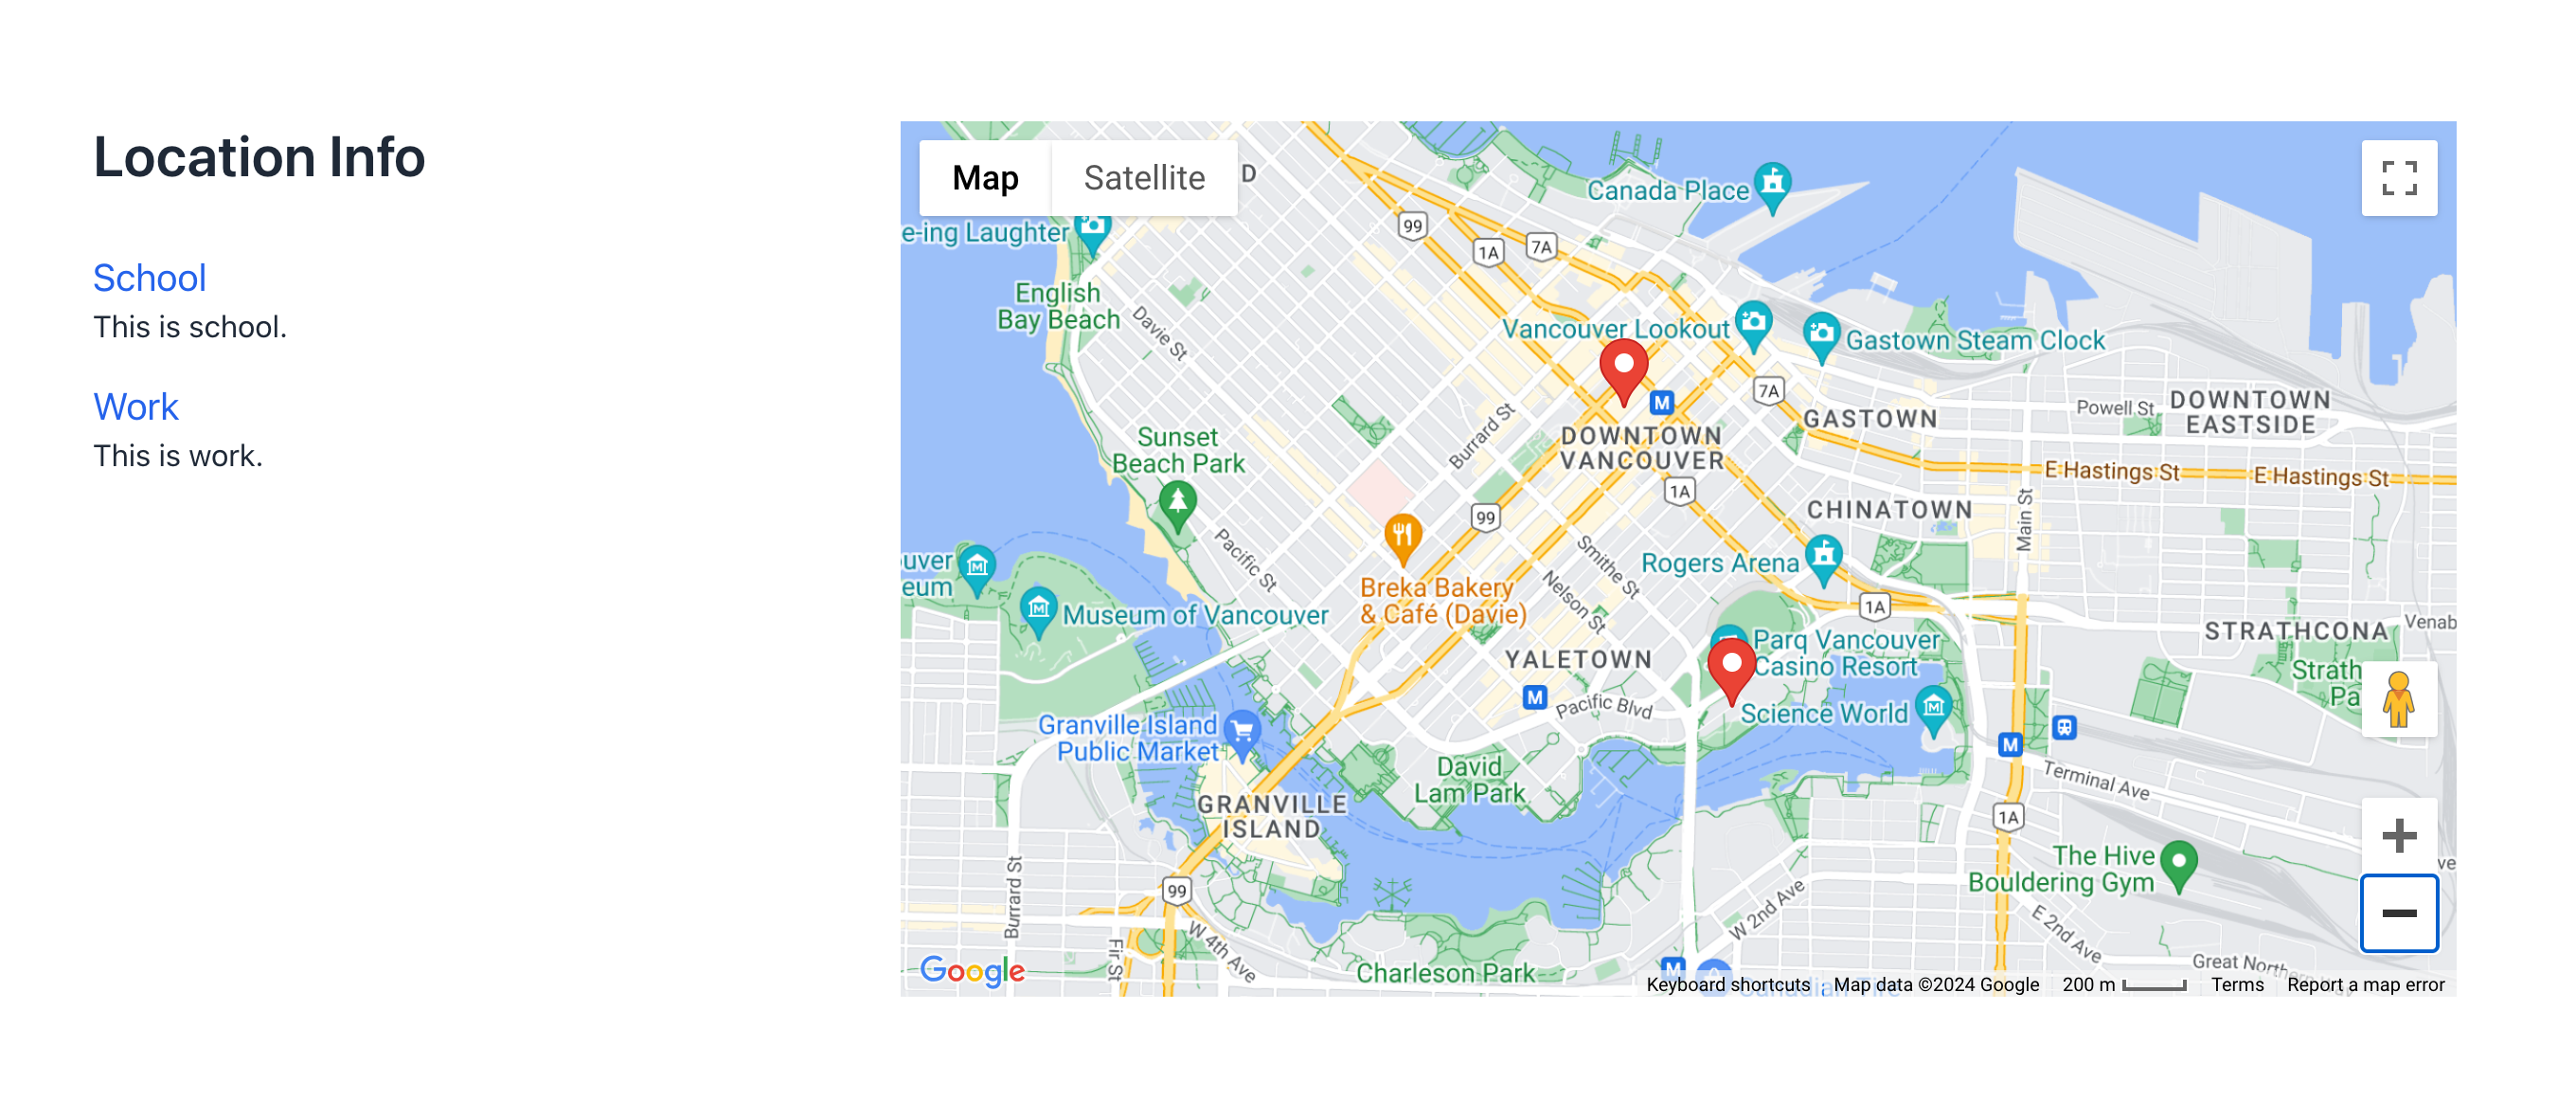 Screenshot of a Google Map with pinned locations, and a list of locations next to the map